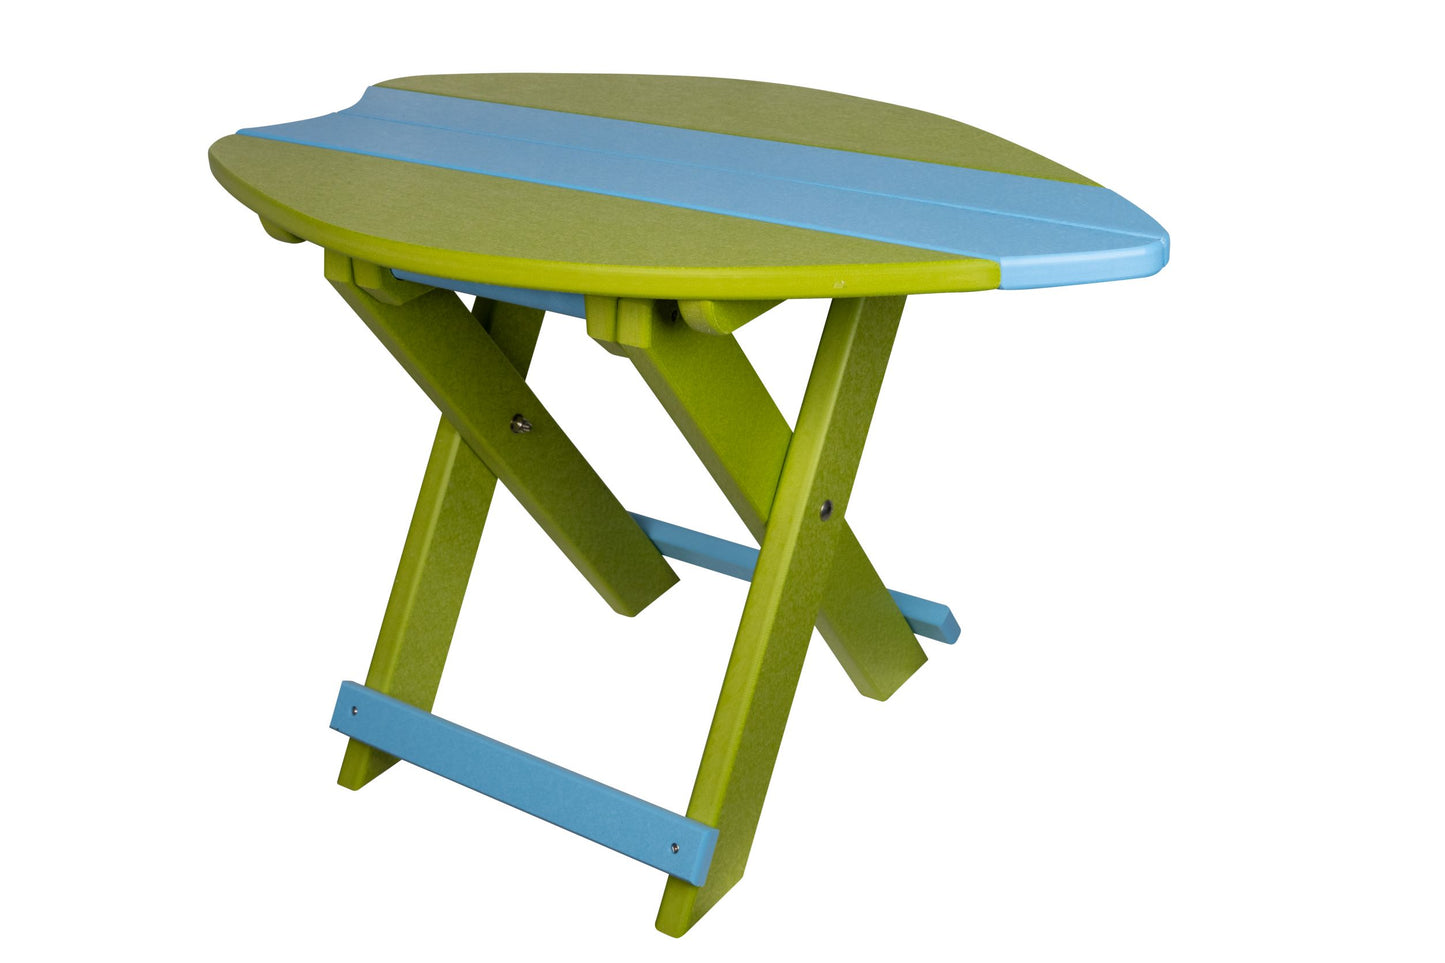 Beaver Dam Woodworks Folding Surf Tables Lime Green and Powder Blue